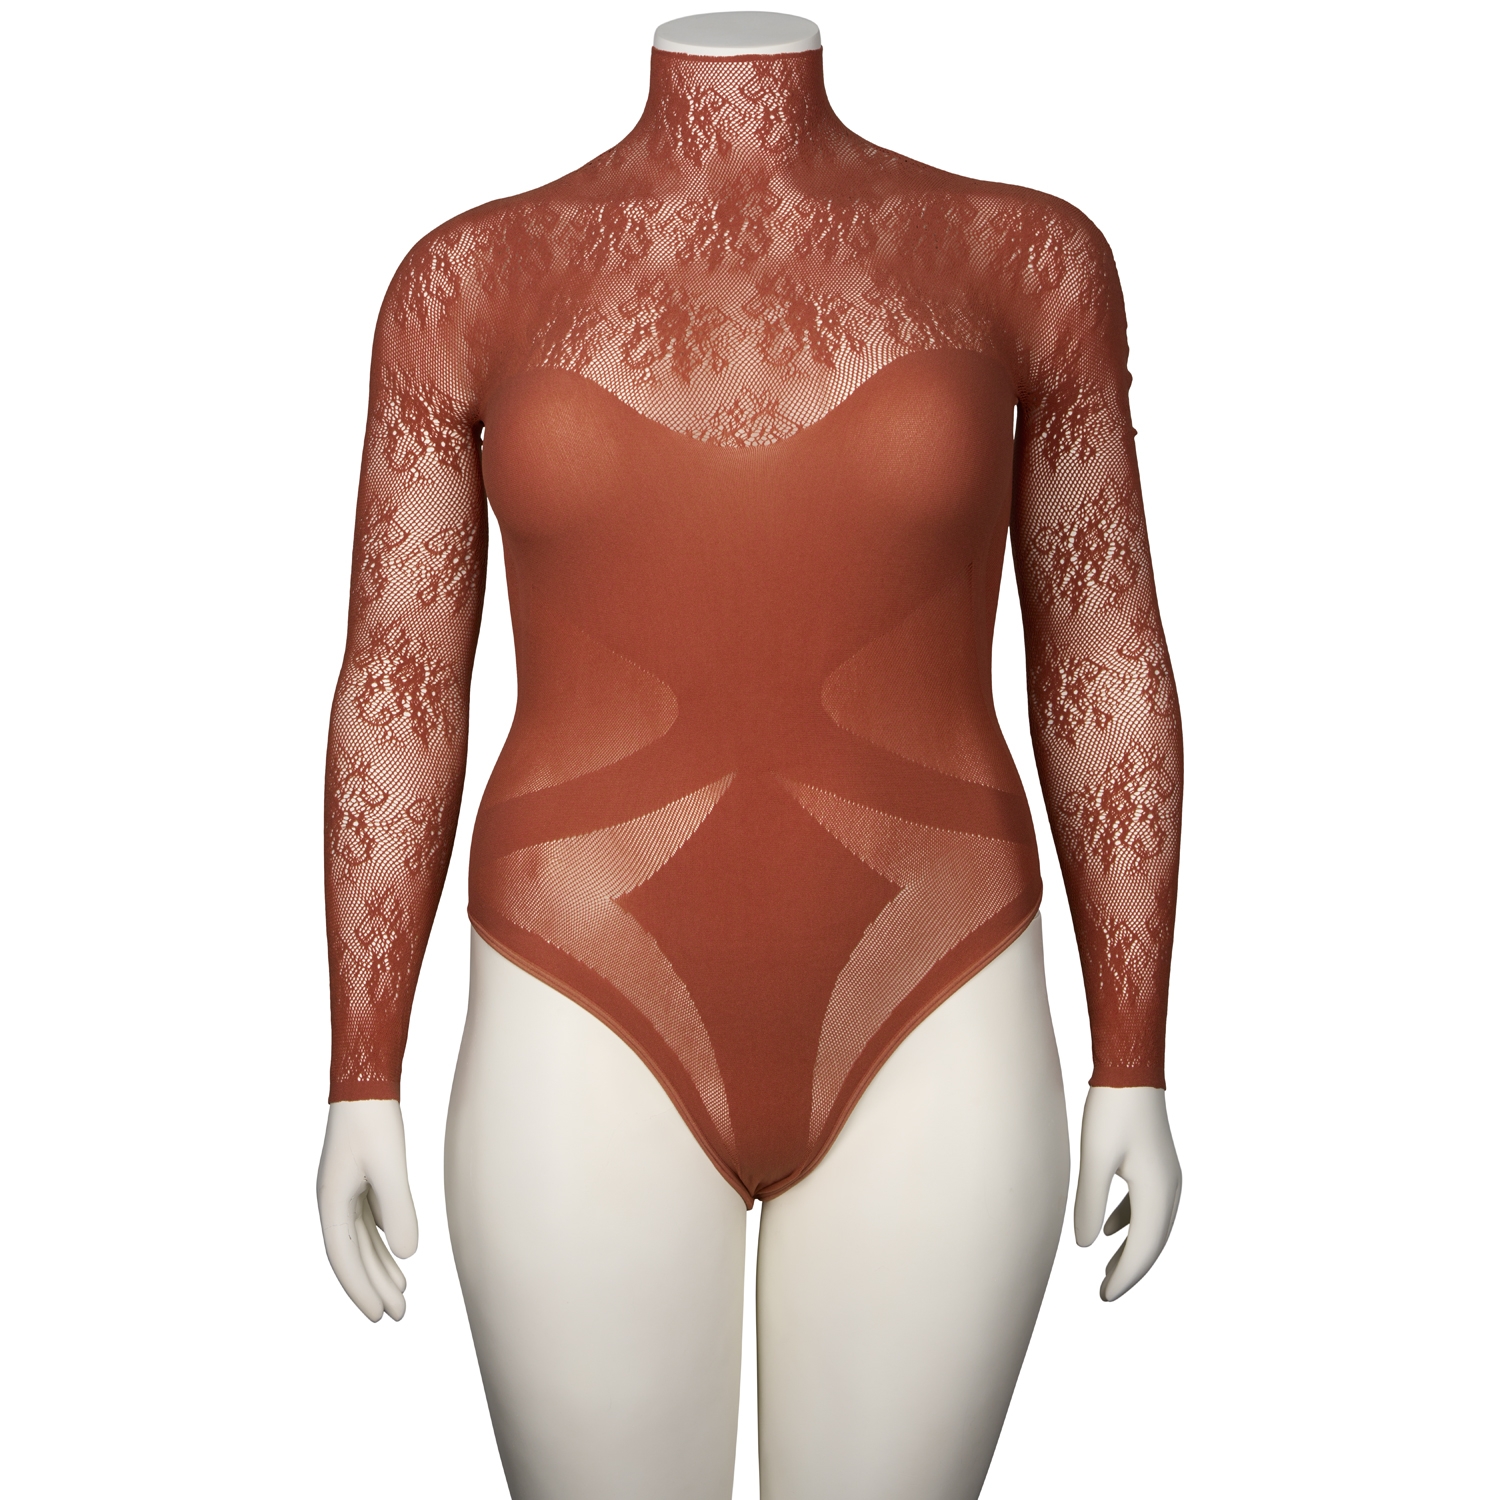 28739-nortie-blossom-esme-rust-bodystocking-plus-size_04_product_q100